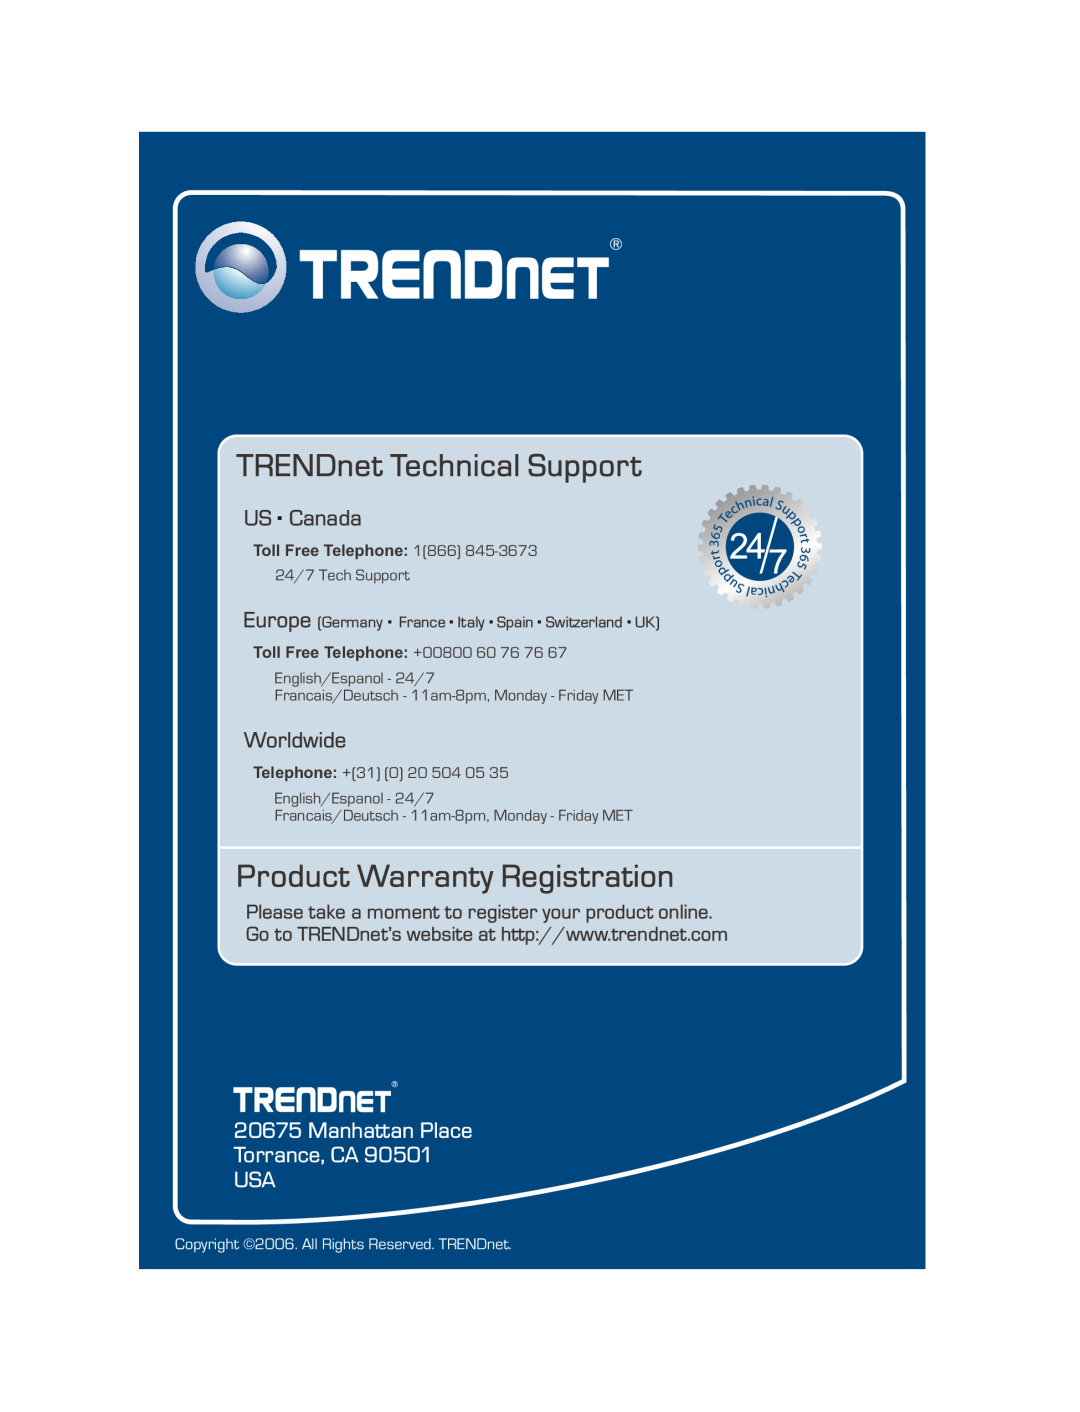 TRENDnet PCIWA TRENDnet Technical Support, Product Warranty Registration, US . Canada, Worldwide, Toll Free Telephone 